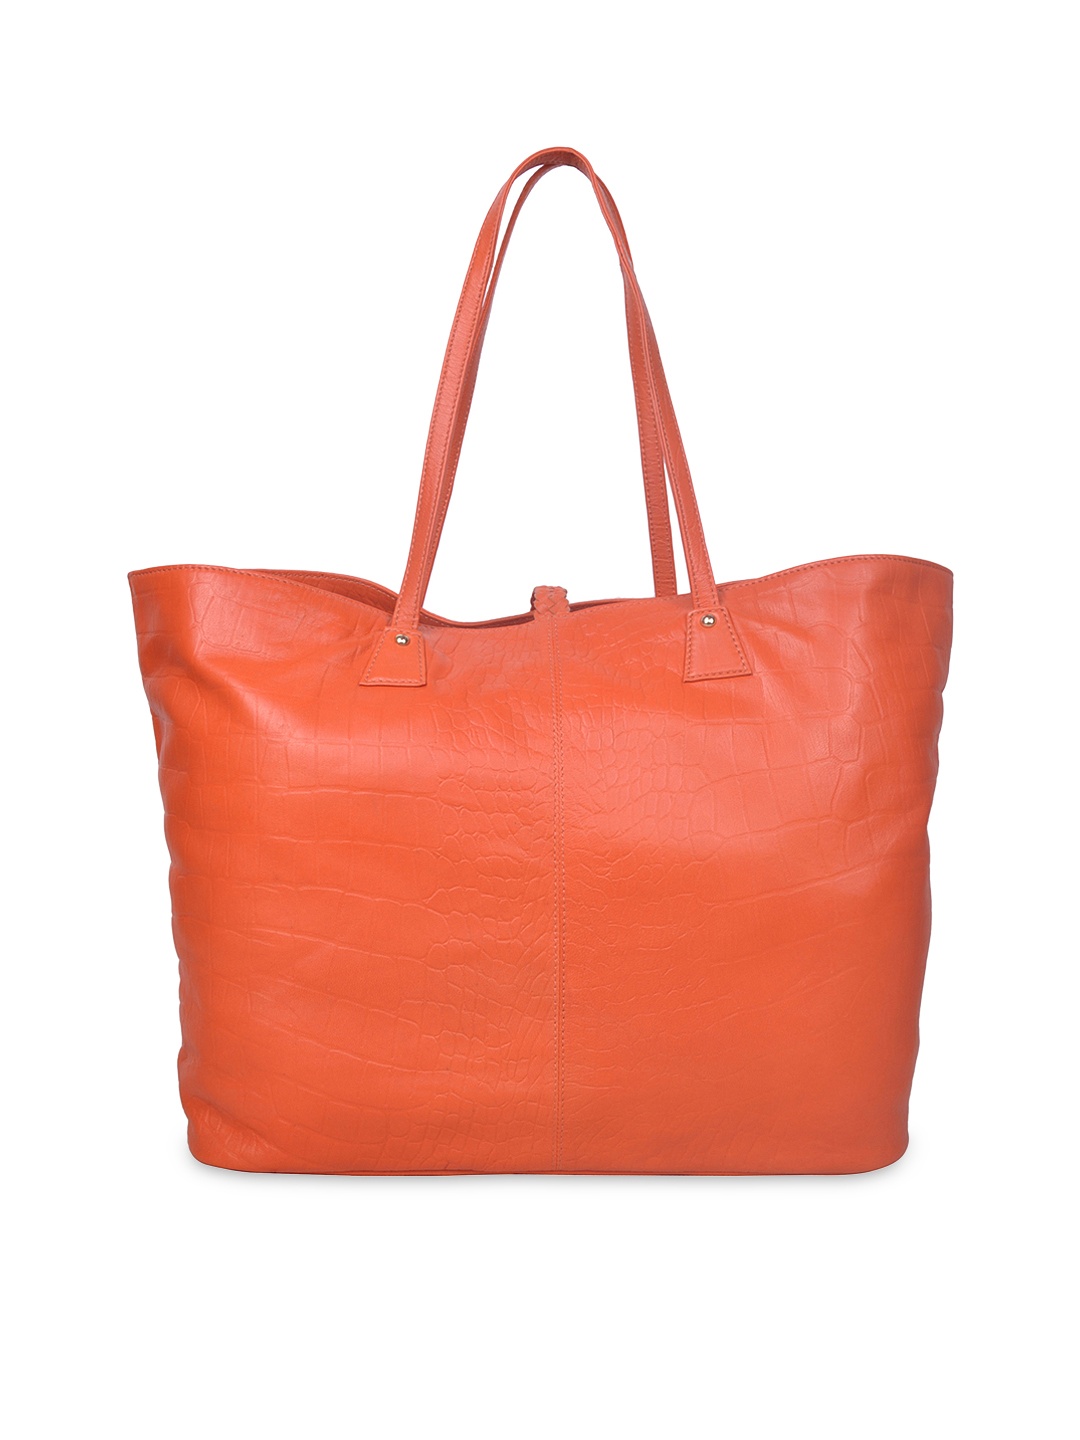 Myntra Justanned Women Orange Leather Tote Bag 809443 | Buy Myntra Justanned Tote Bags at best ...